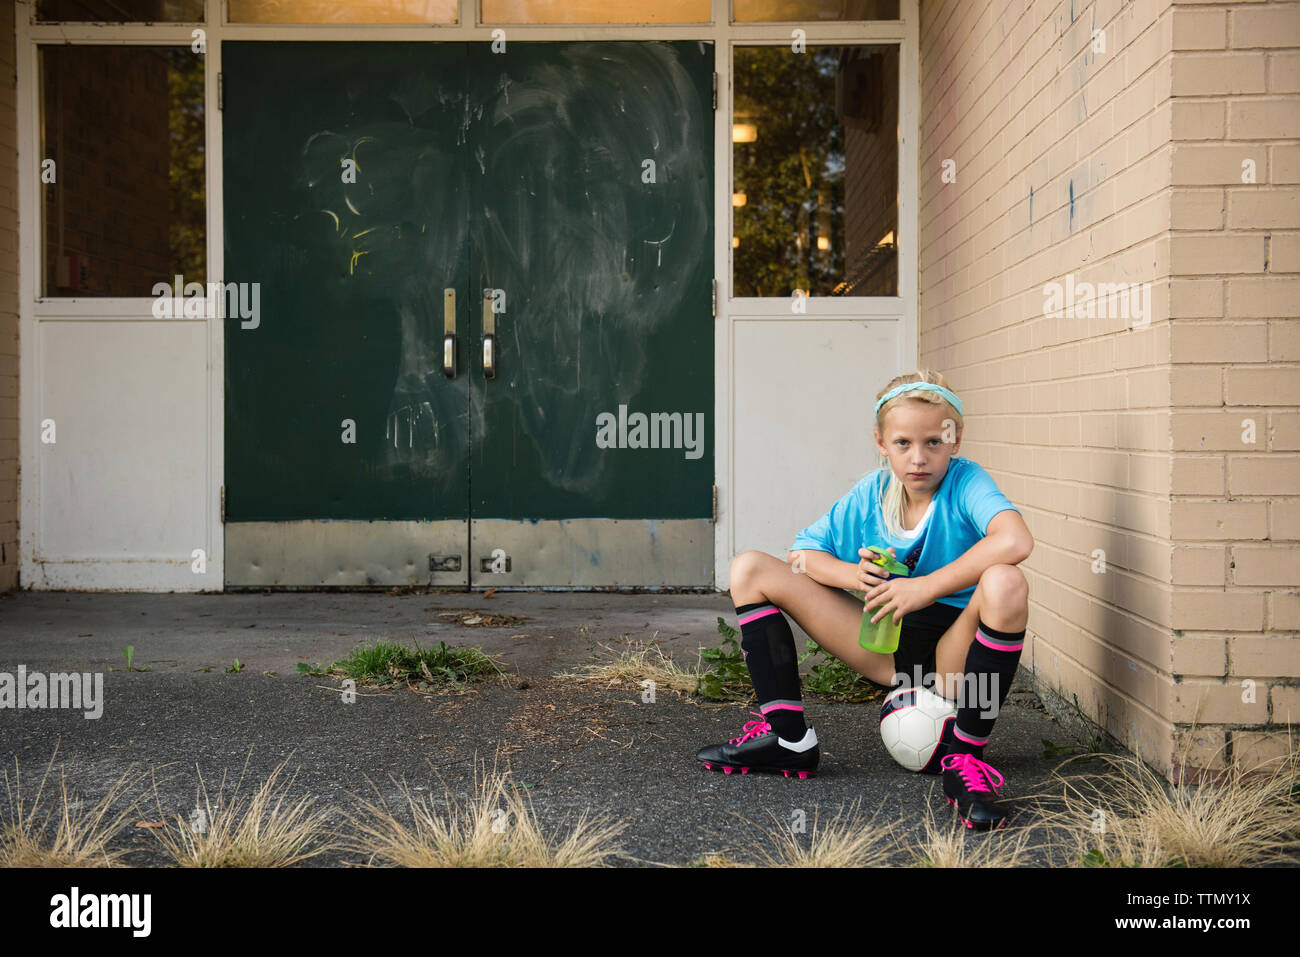 Portrait of girl in sports uniform holding water bottle while sitting on ball at yard Stock Photo